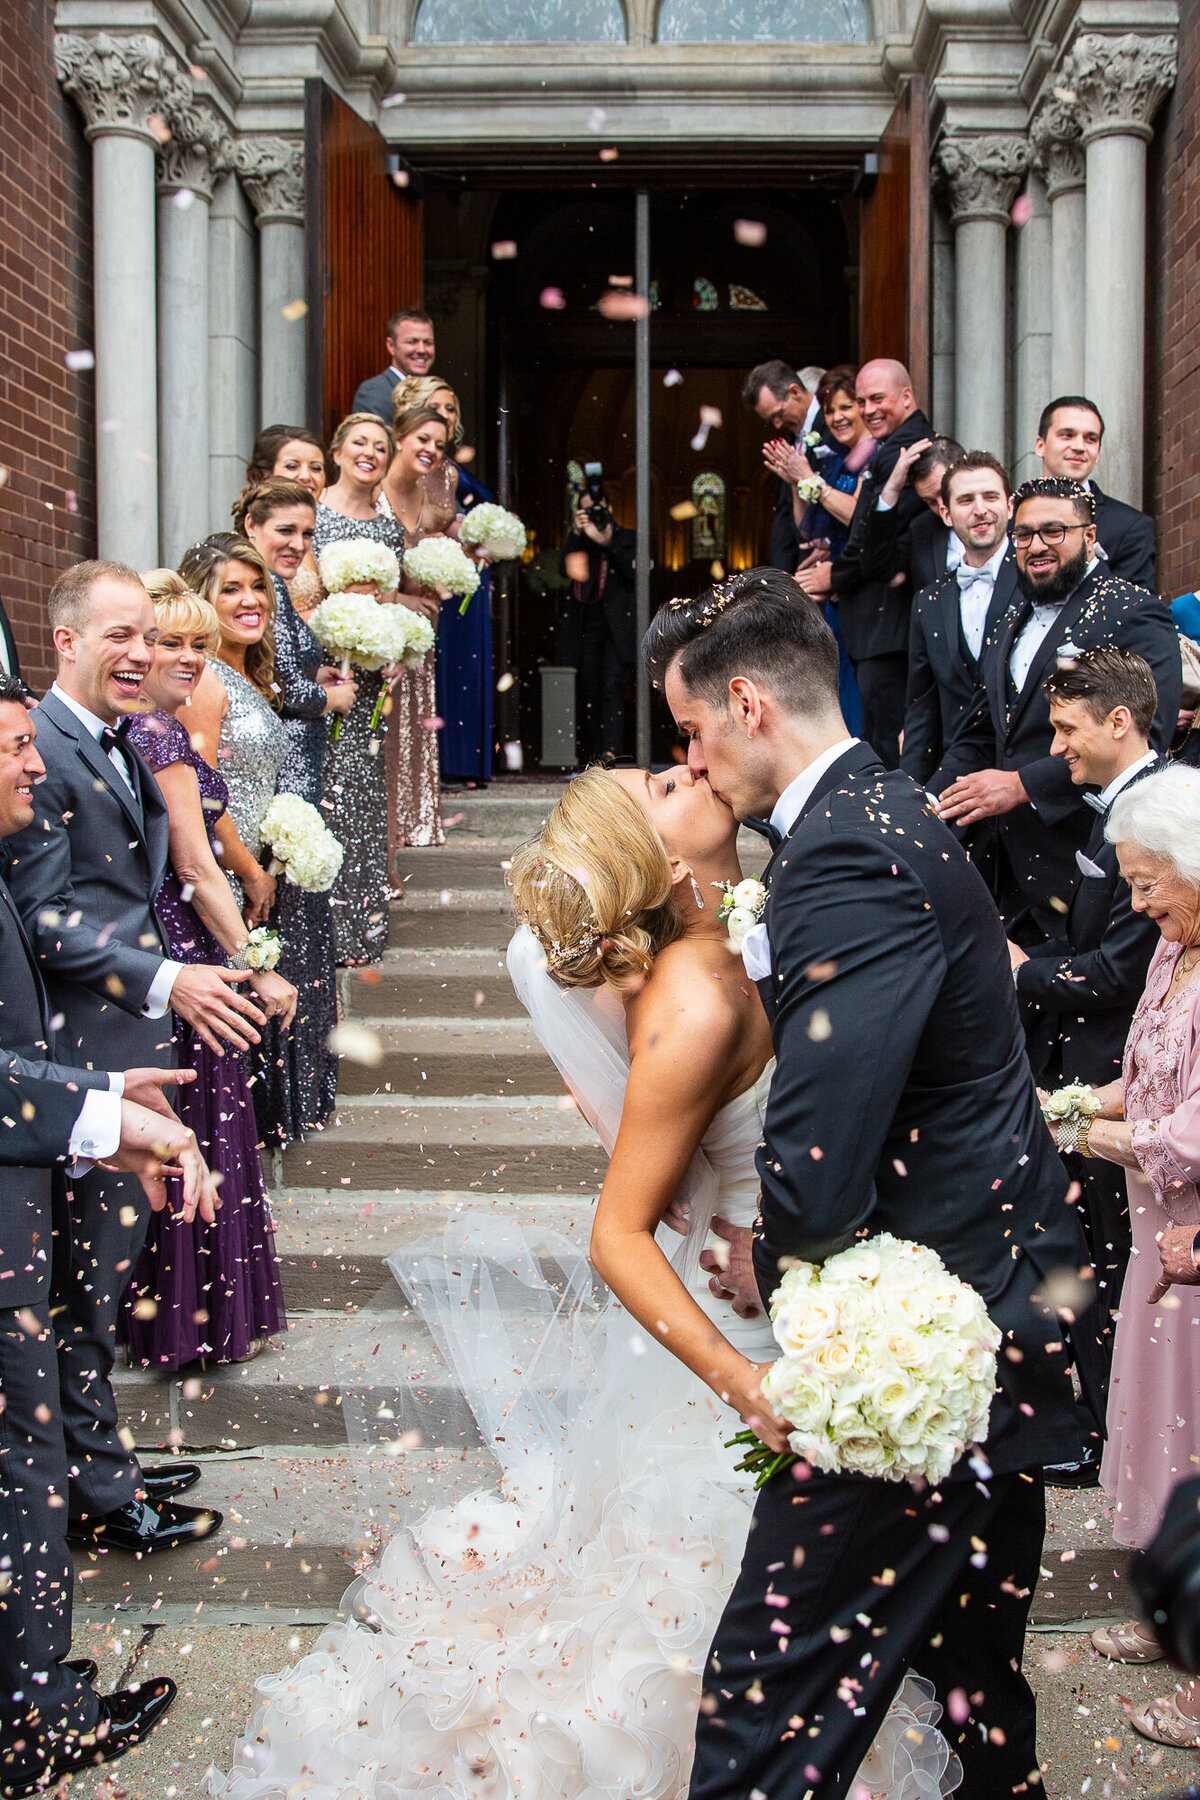 A confetti exit for the bride and groom at a church.